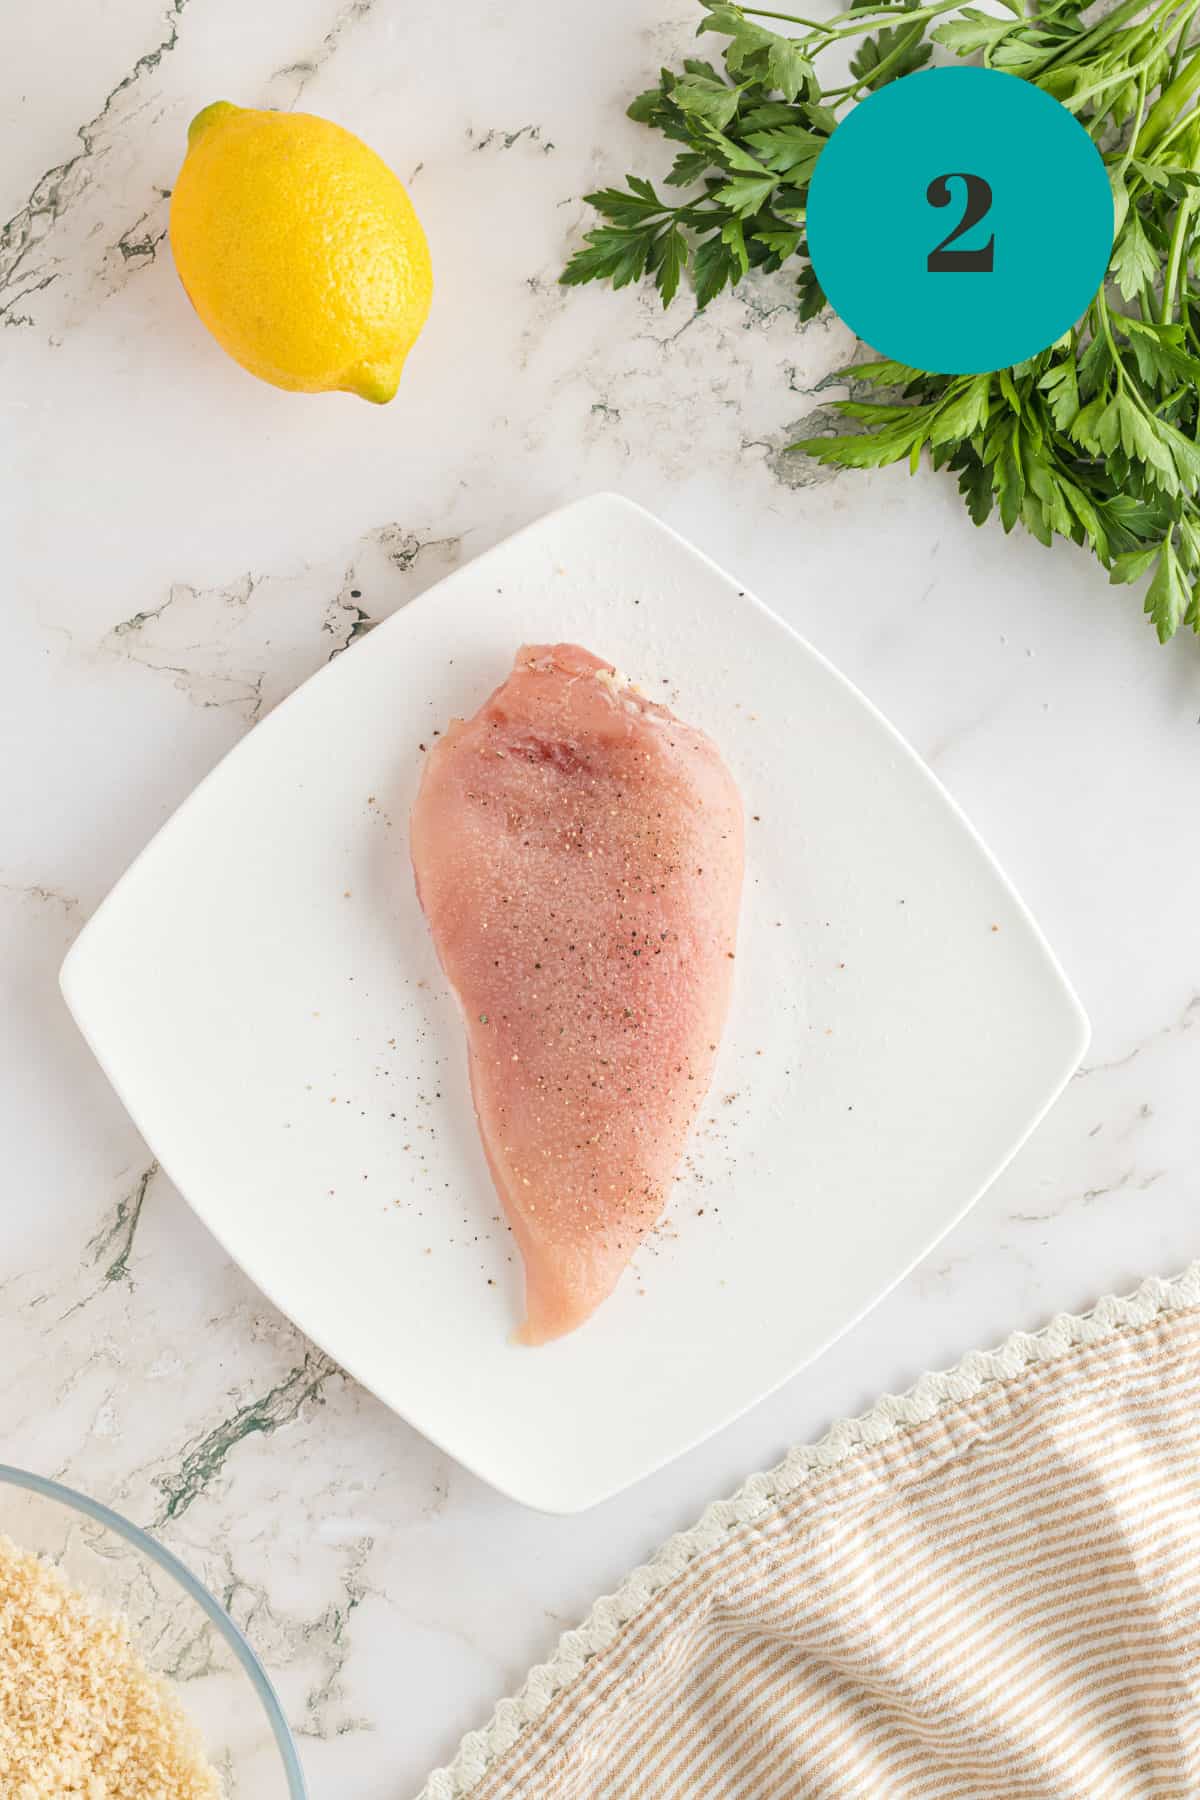 Adding salt and pepper to a piece of raw chicken.